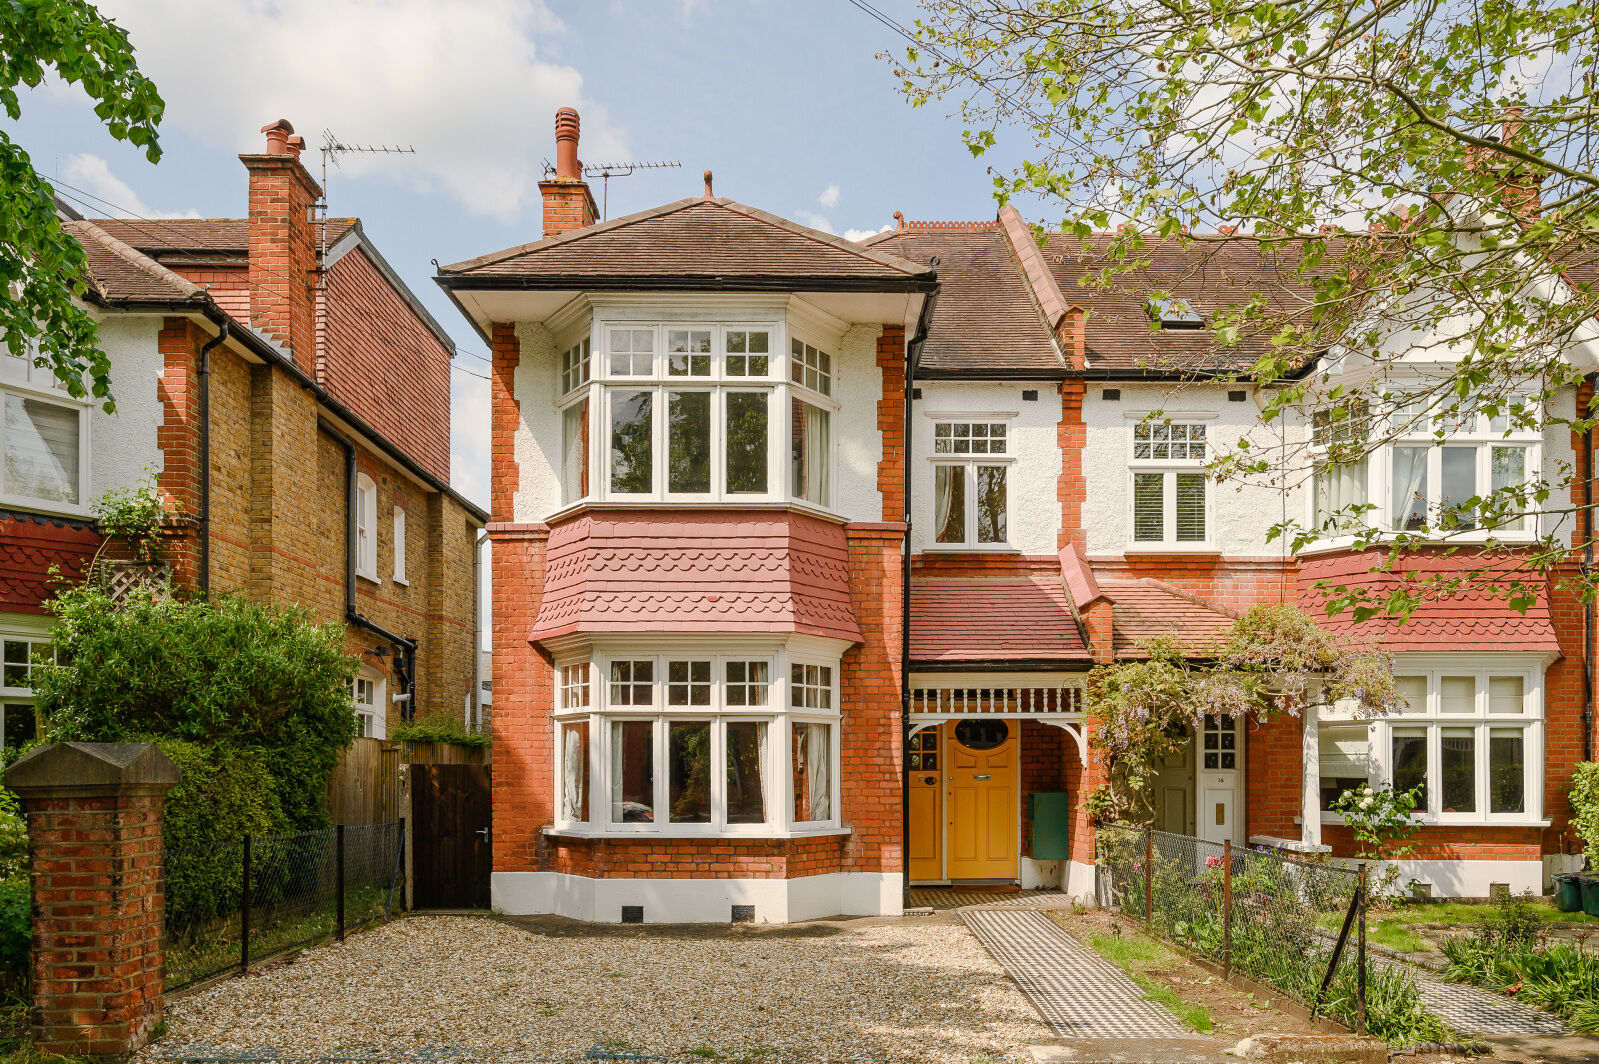 4 bedroom end terraced house for sale Manor Gardens, Wimbledon, SW20, main image